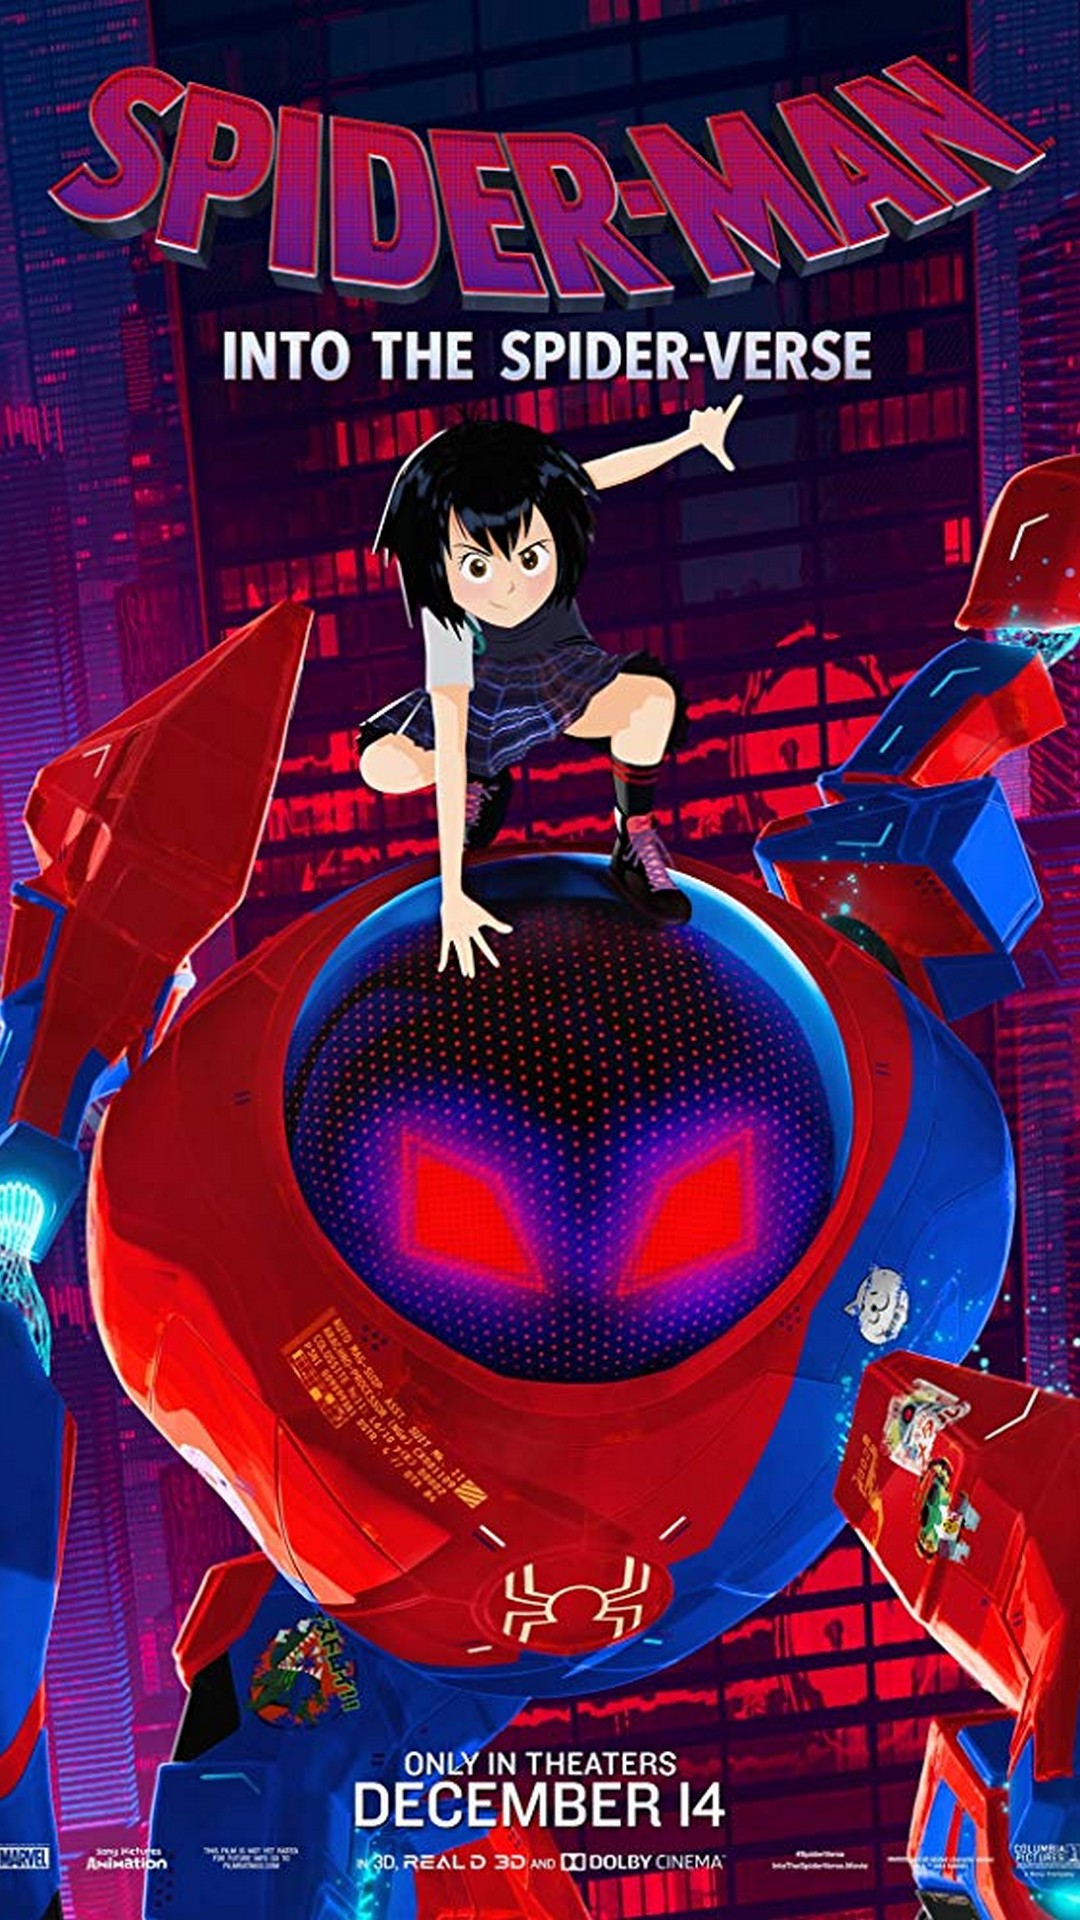 Spider-Man Into the Spider-Verse Wallpaper For Android with image resolution 1080x1920 pixel. You can make this wallpaper for your Desktop Computer Backgrounds, Mac Wallpapers, Android Lock screen or iPhone Screensavers